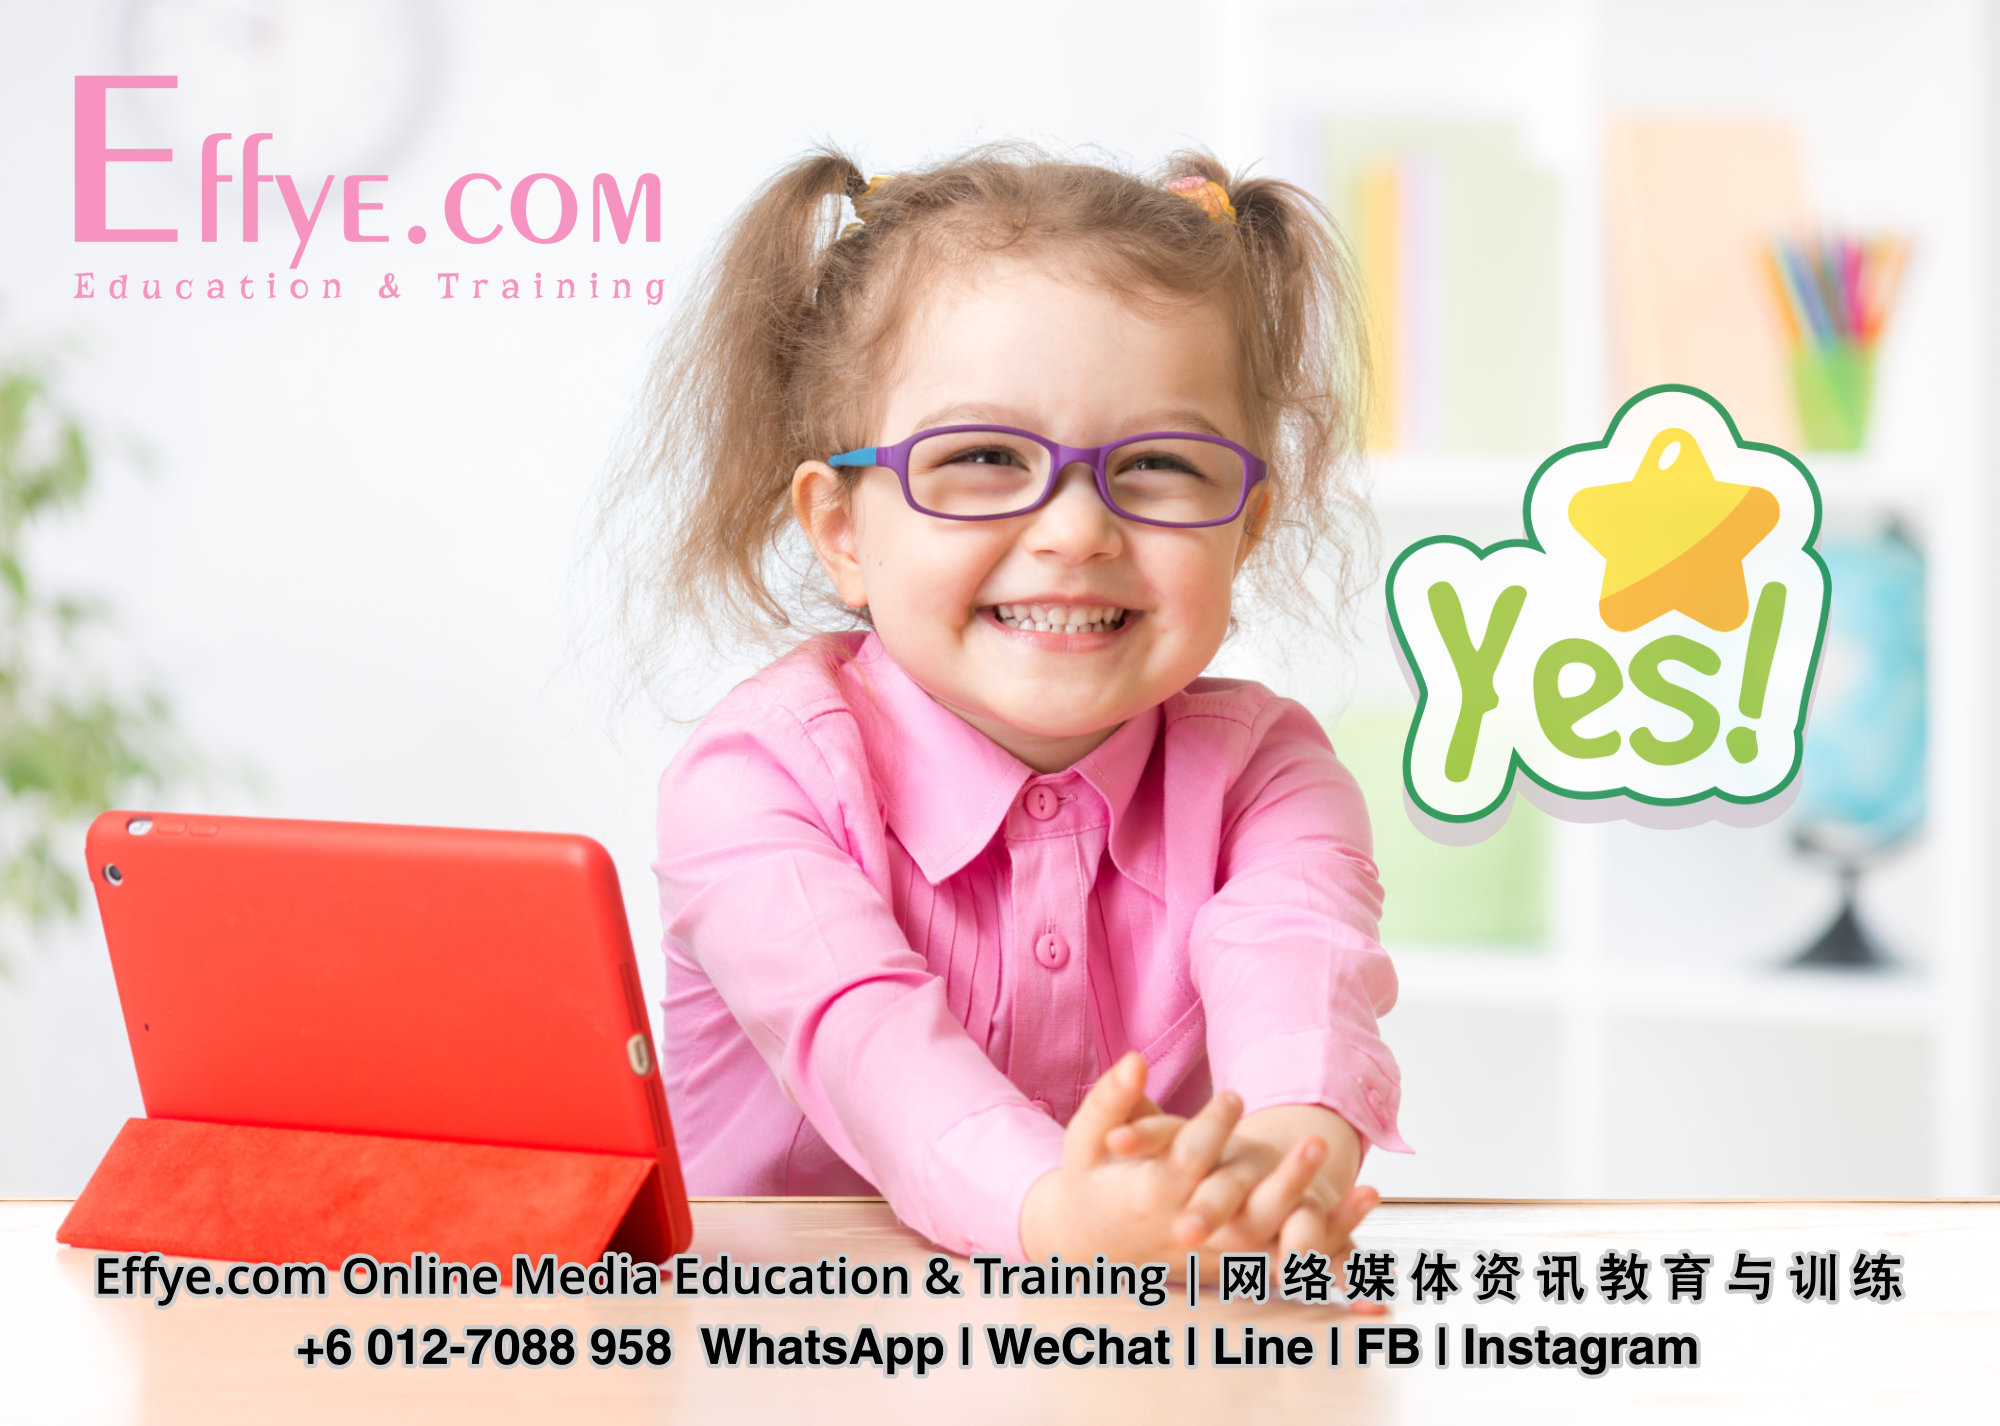 Effye Media Malaysia Johor Batu Pahat Online Media Education and Training for Staff Company Owner Boss Entrepreneur Teacher Students Youth Child and Children A06.jpg